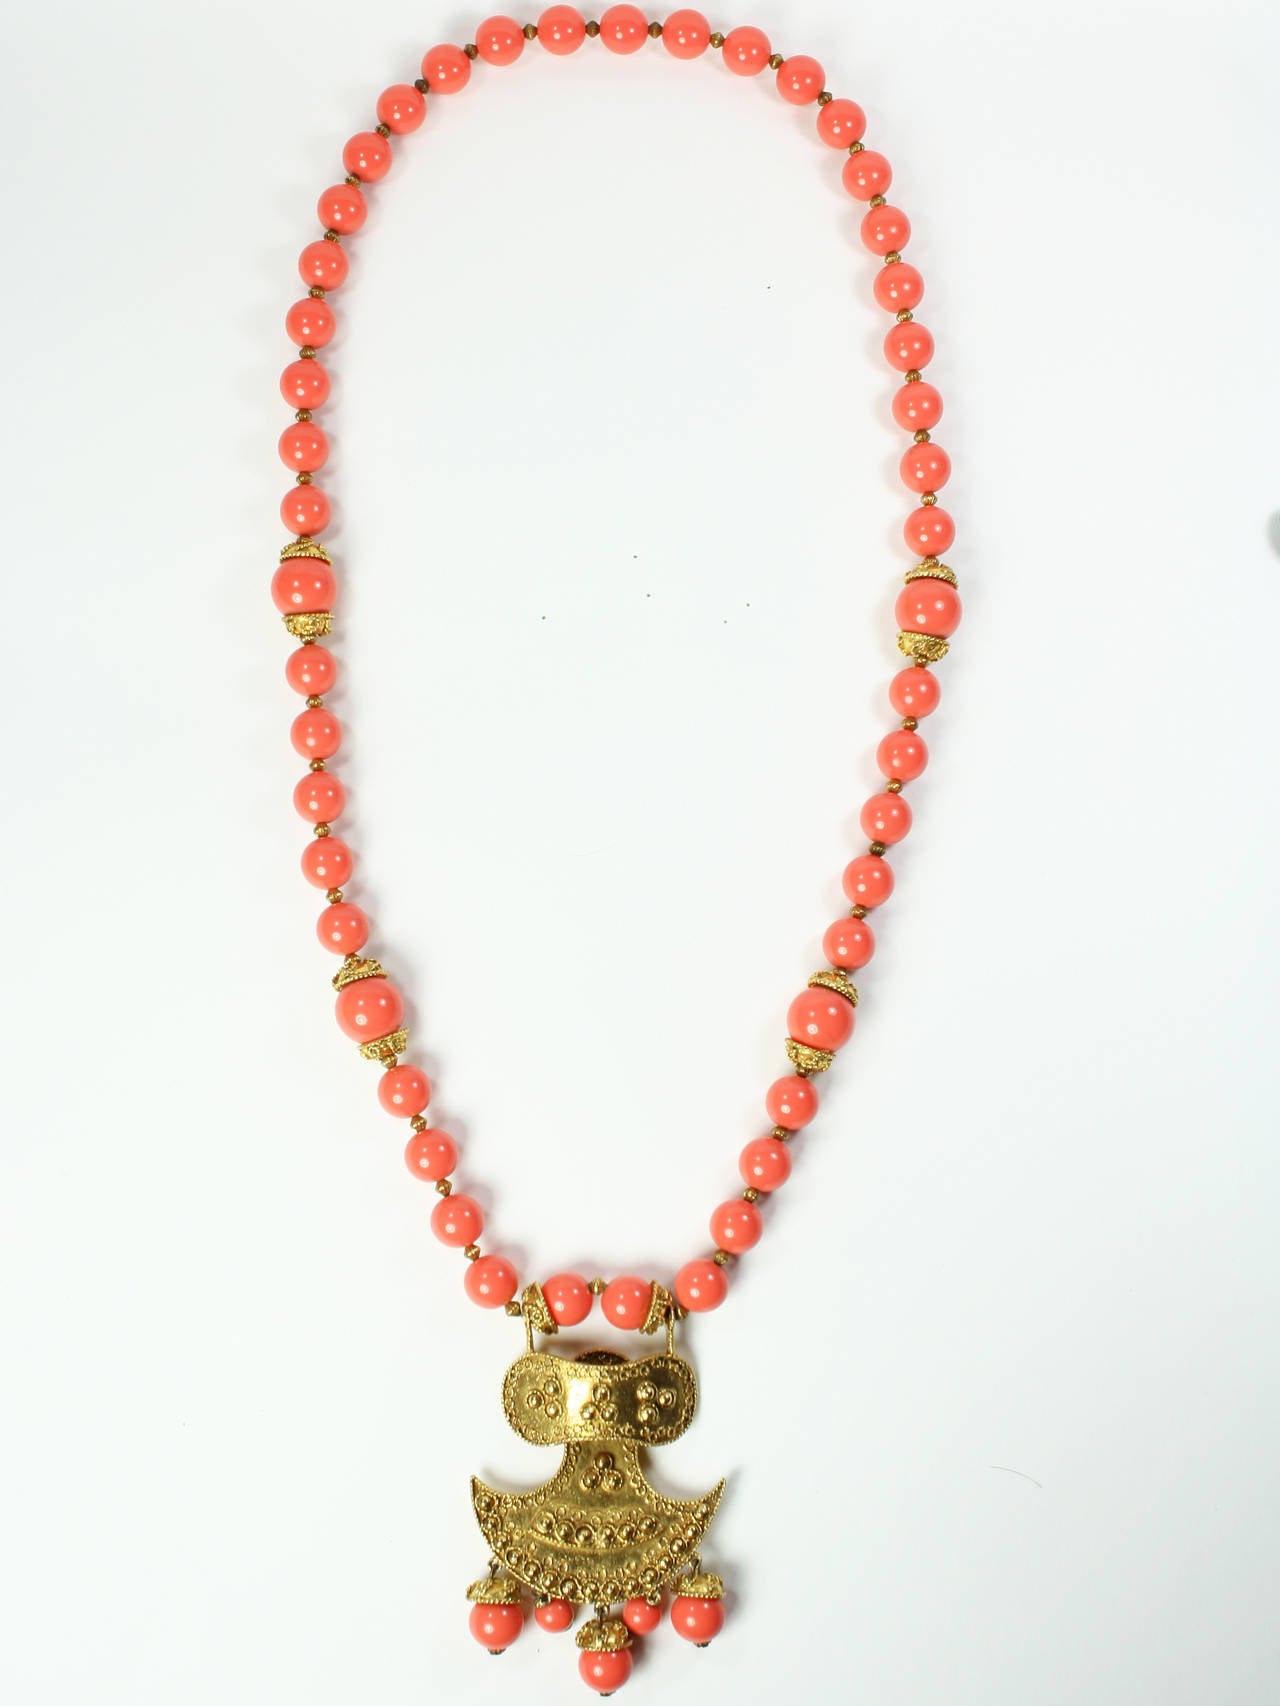 1970s Kenneth Lane Long Coral and Gold Resort Necklace.
Very long length. Thai/Balinese style with coral beads. A perfect 
resort accessory. Excellent condition.